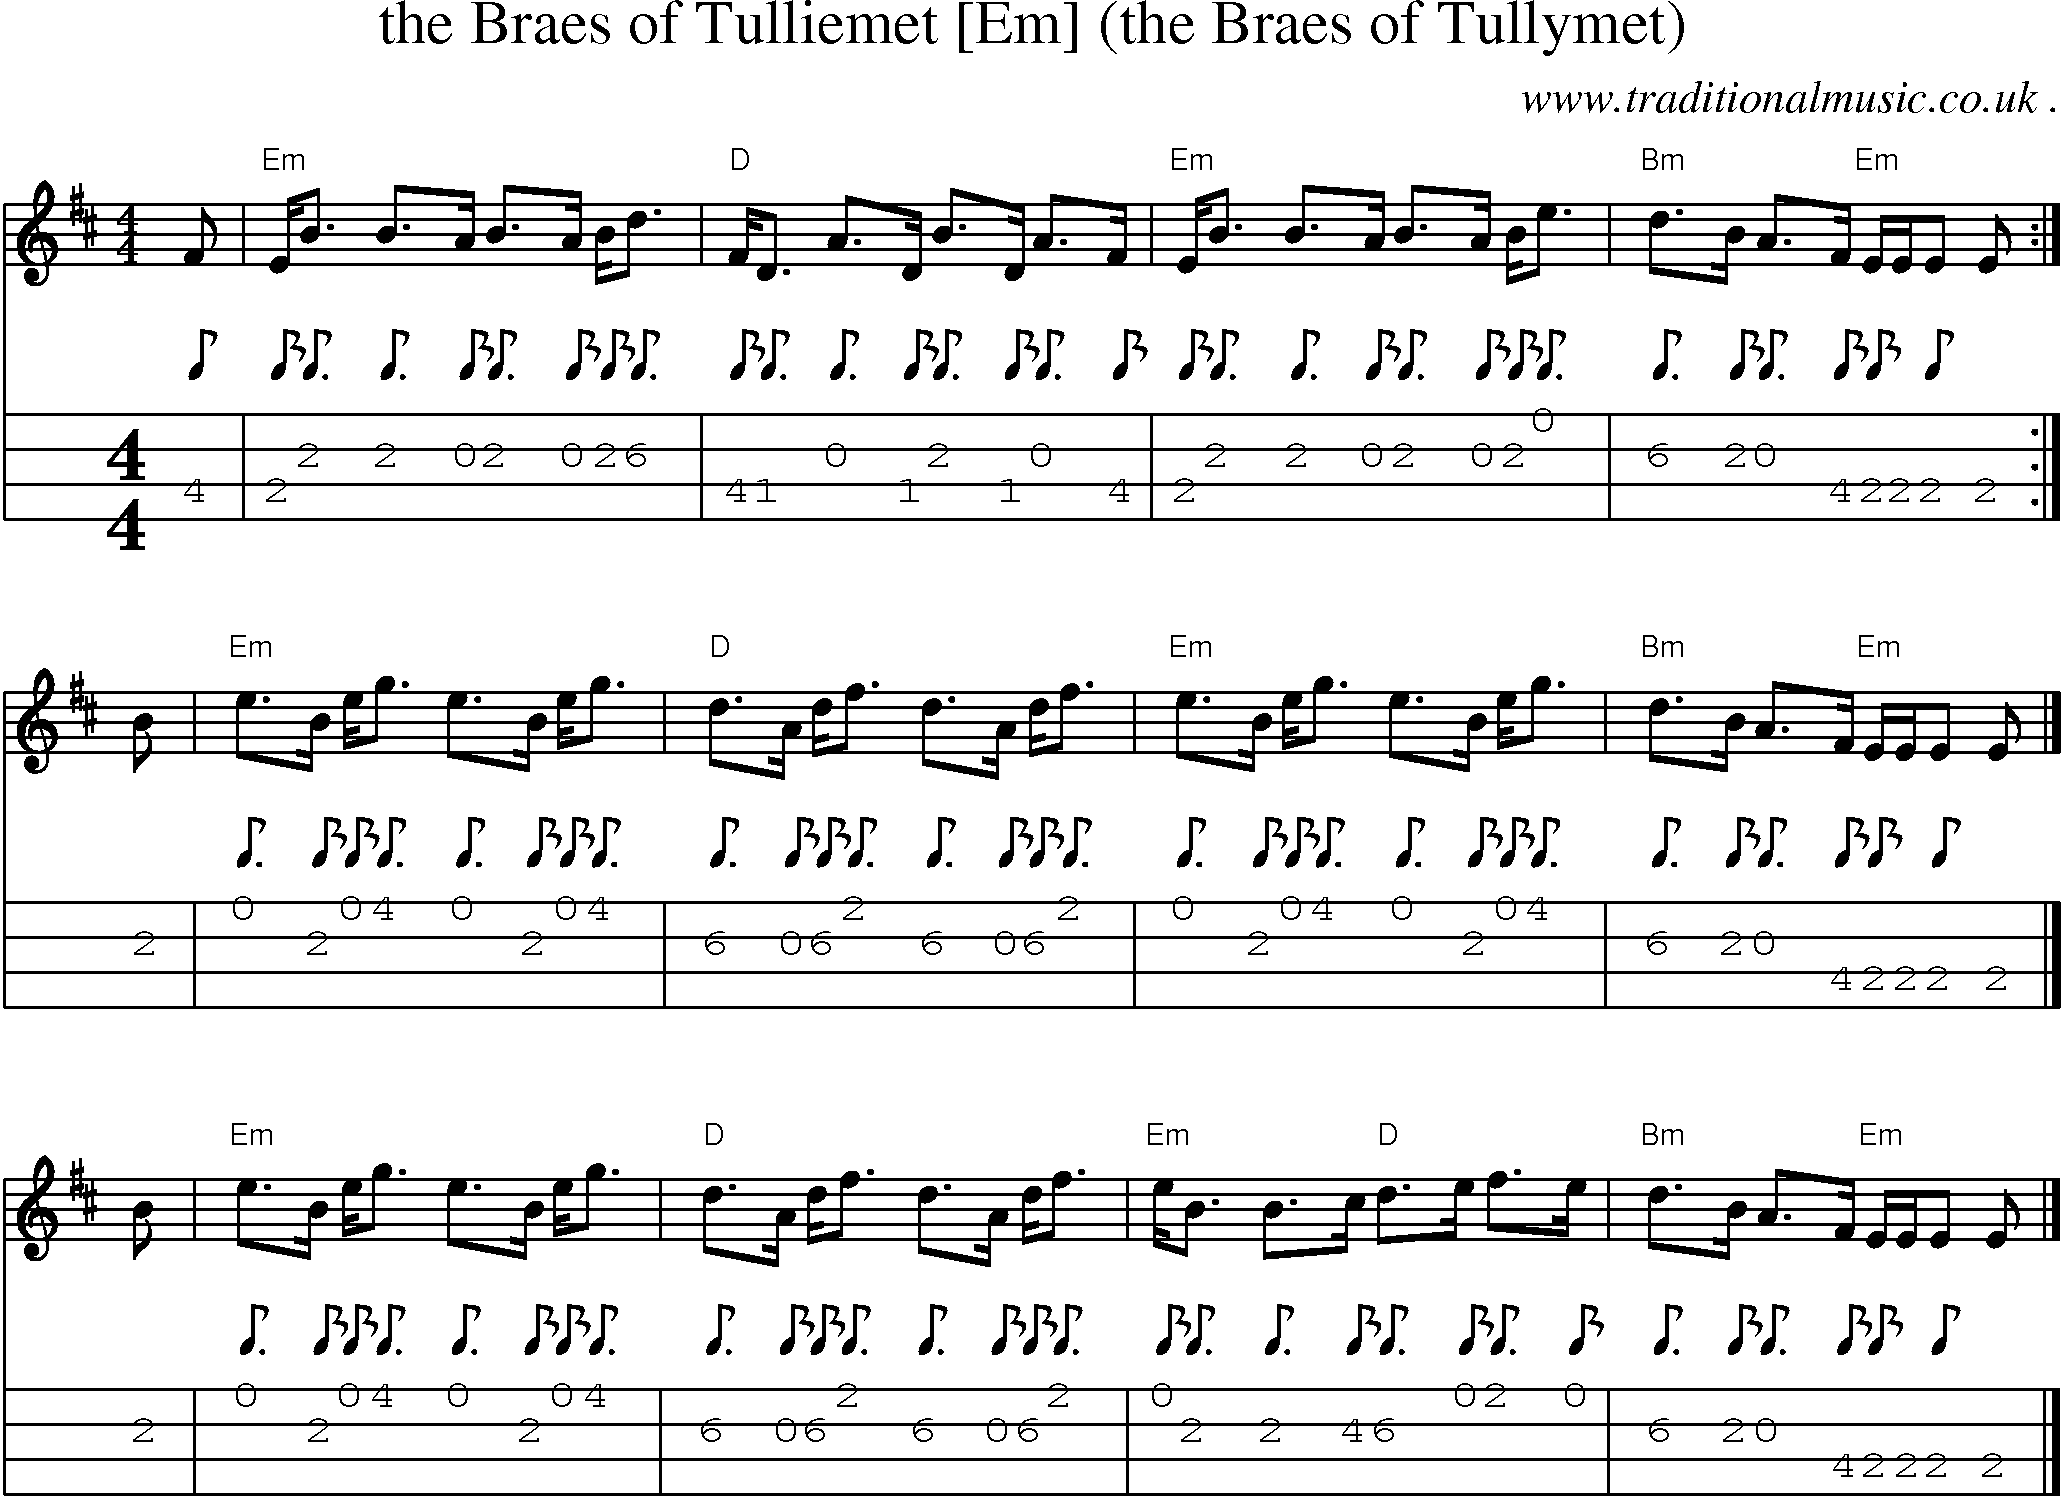 Sheet-music  score, Chords and Mandolin Tabs for The Braes Of Tulliemet [em] The Braes Of Tullymet